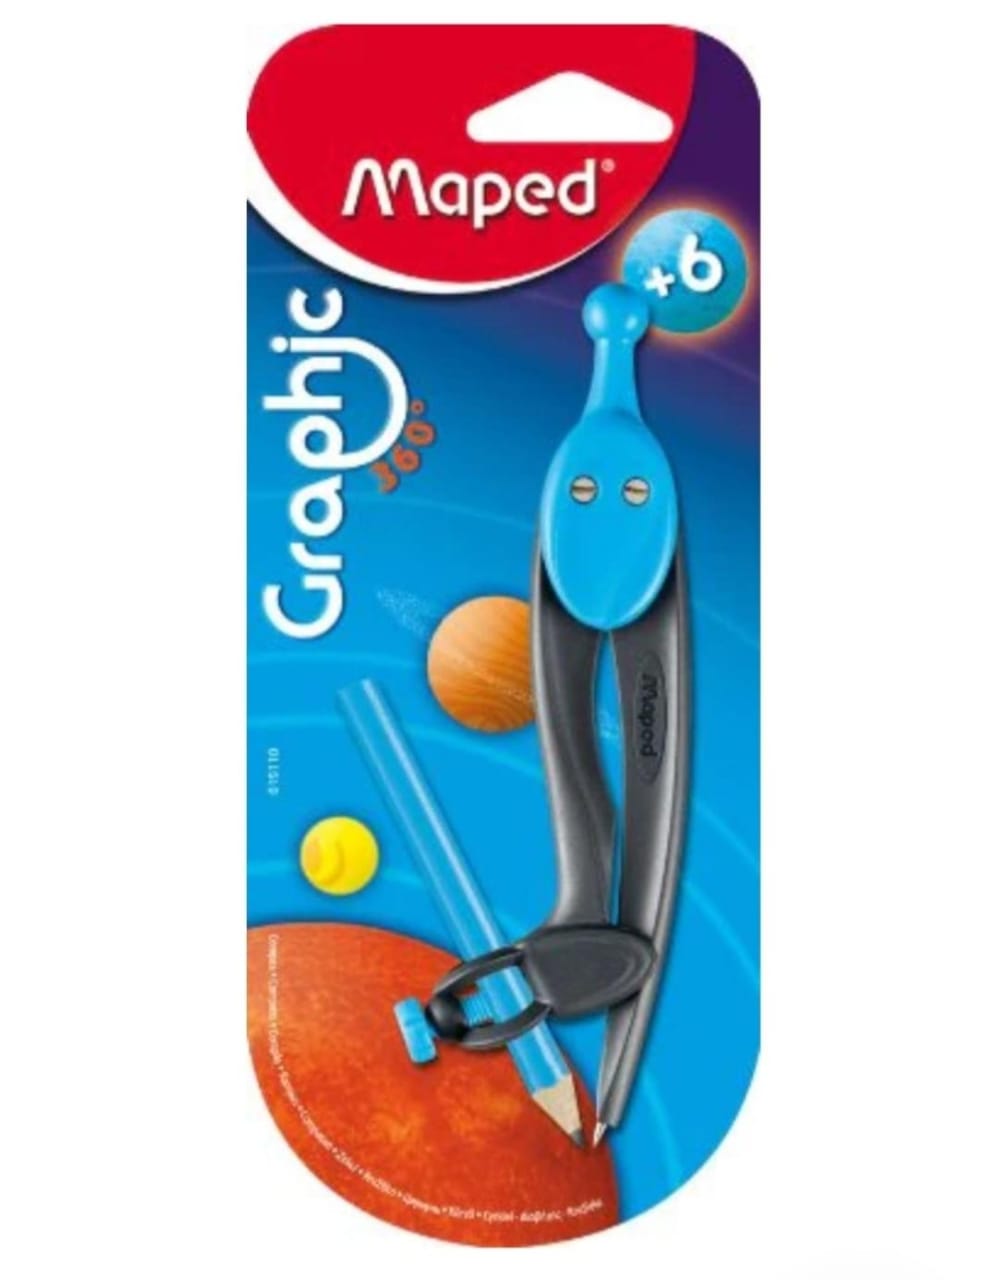 Maped Graphic Compass for Pen